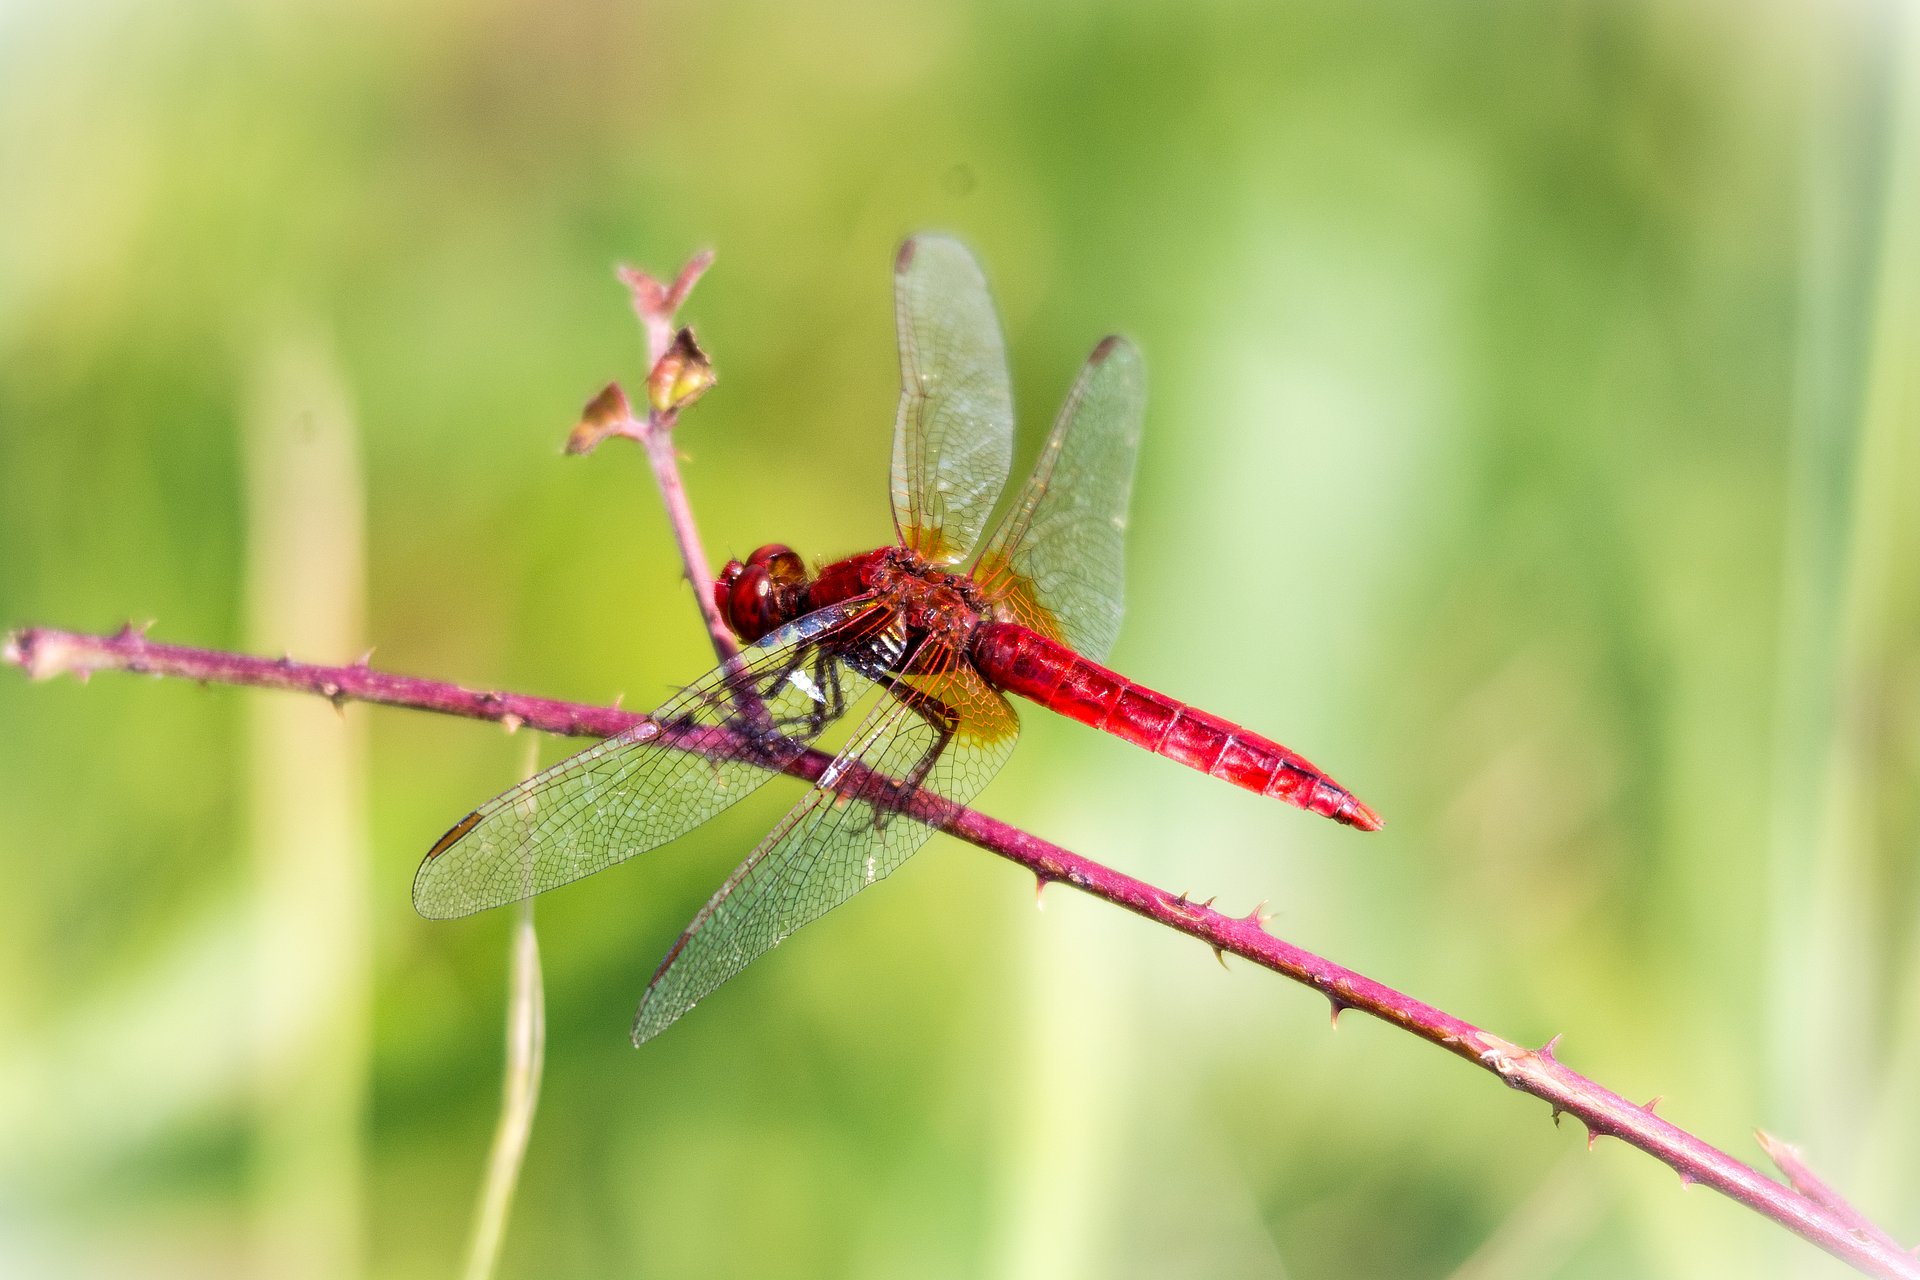 The scarlet dragonfly (Crocothemis erythraea) is one of the best-known beneficiaries of global warming. The dragonfly, most common in the Mediterranean region, first appeared in Bavaria in the early 1990s and is now widespread. 